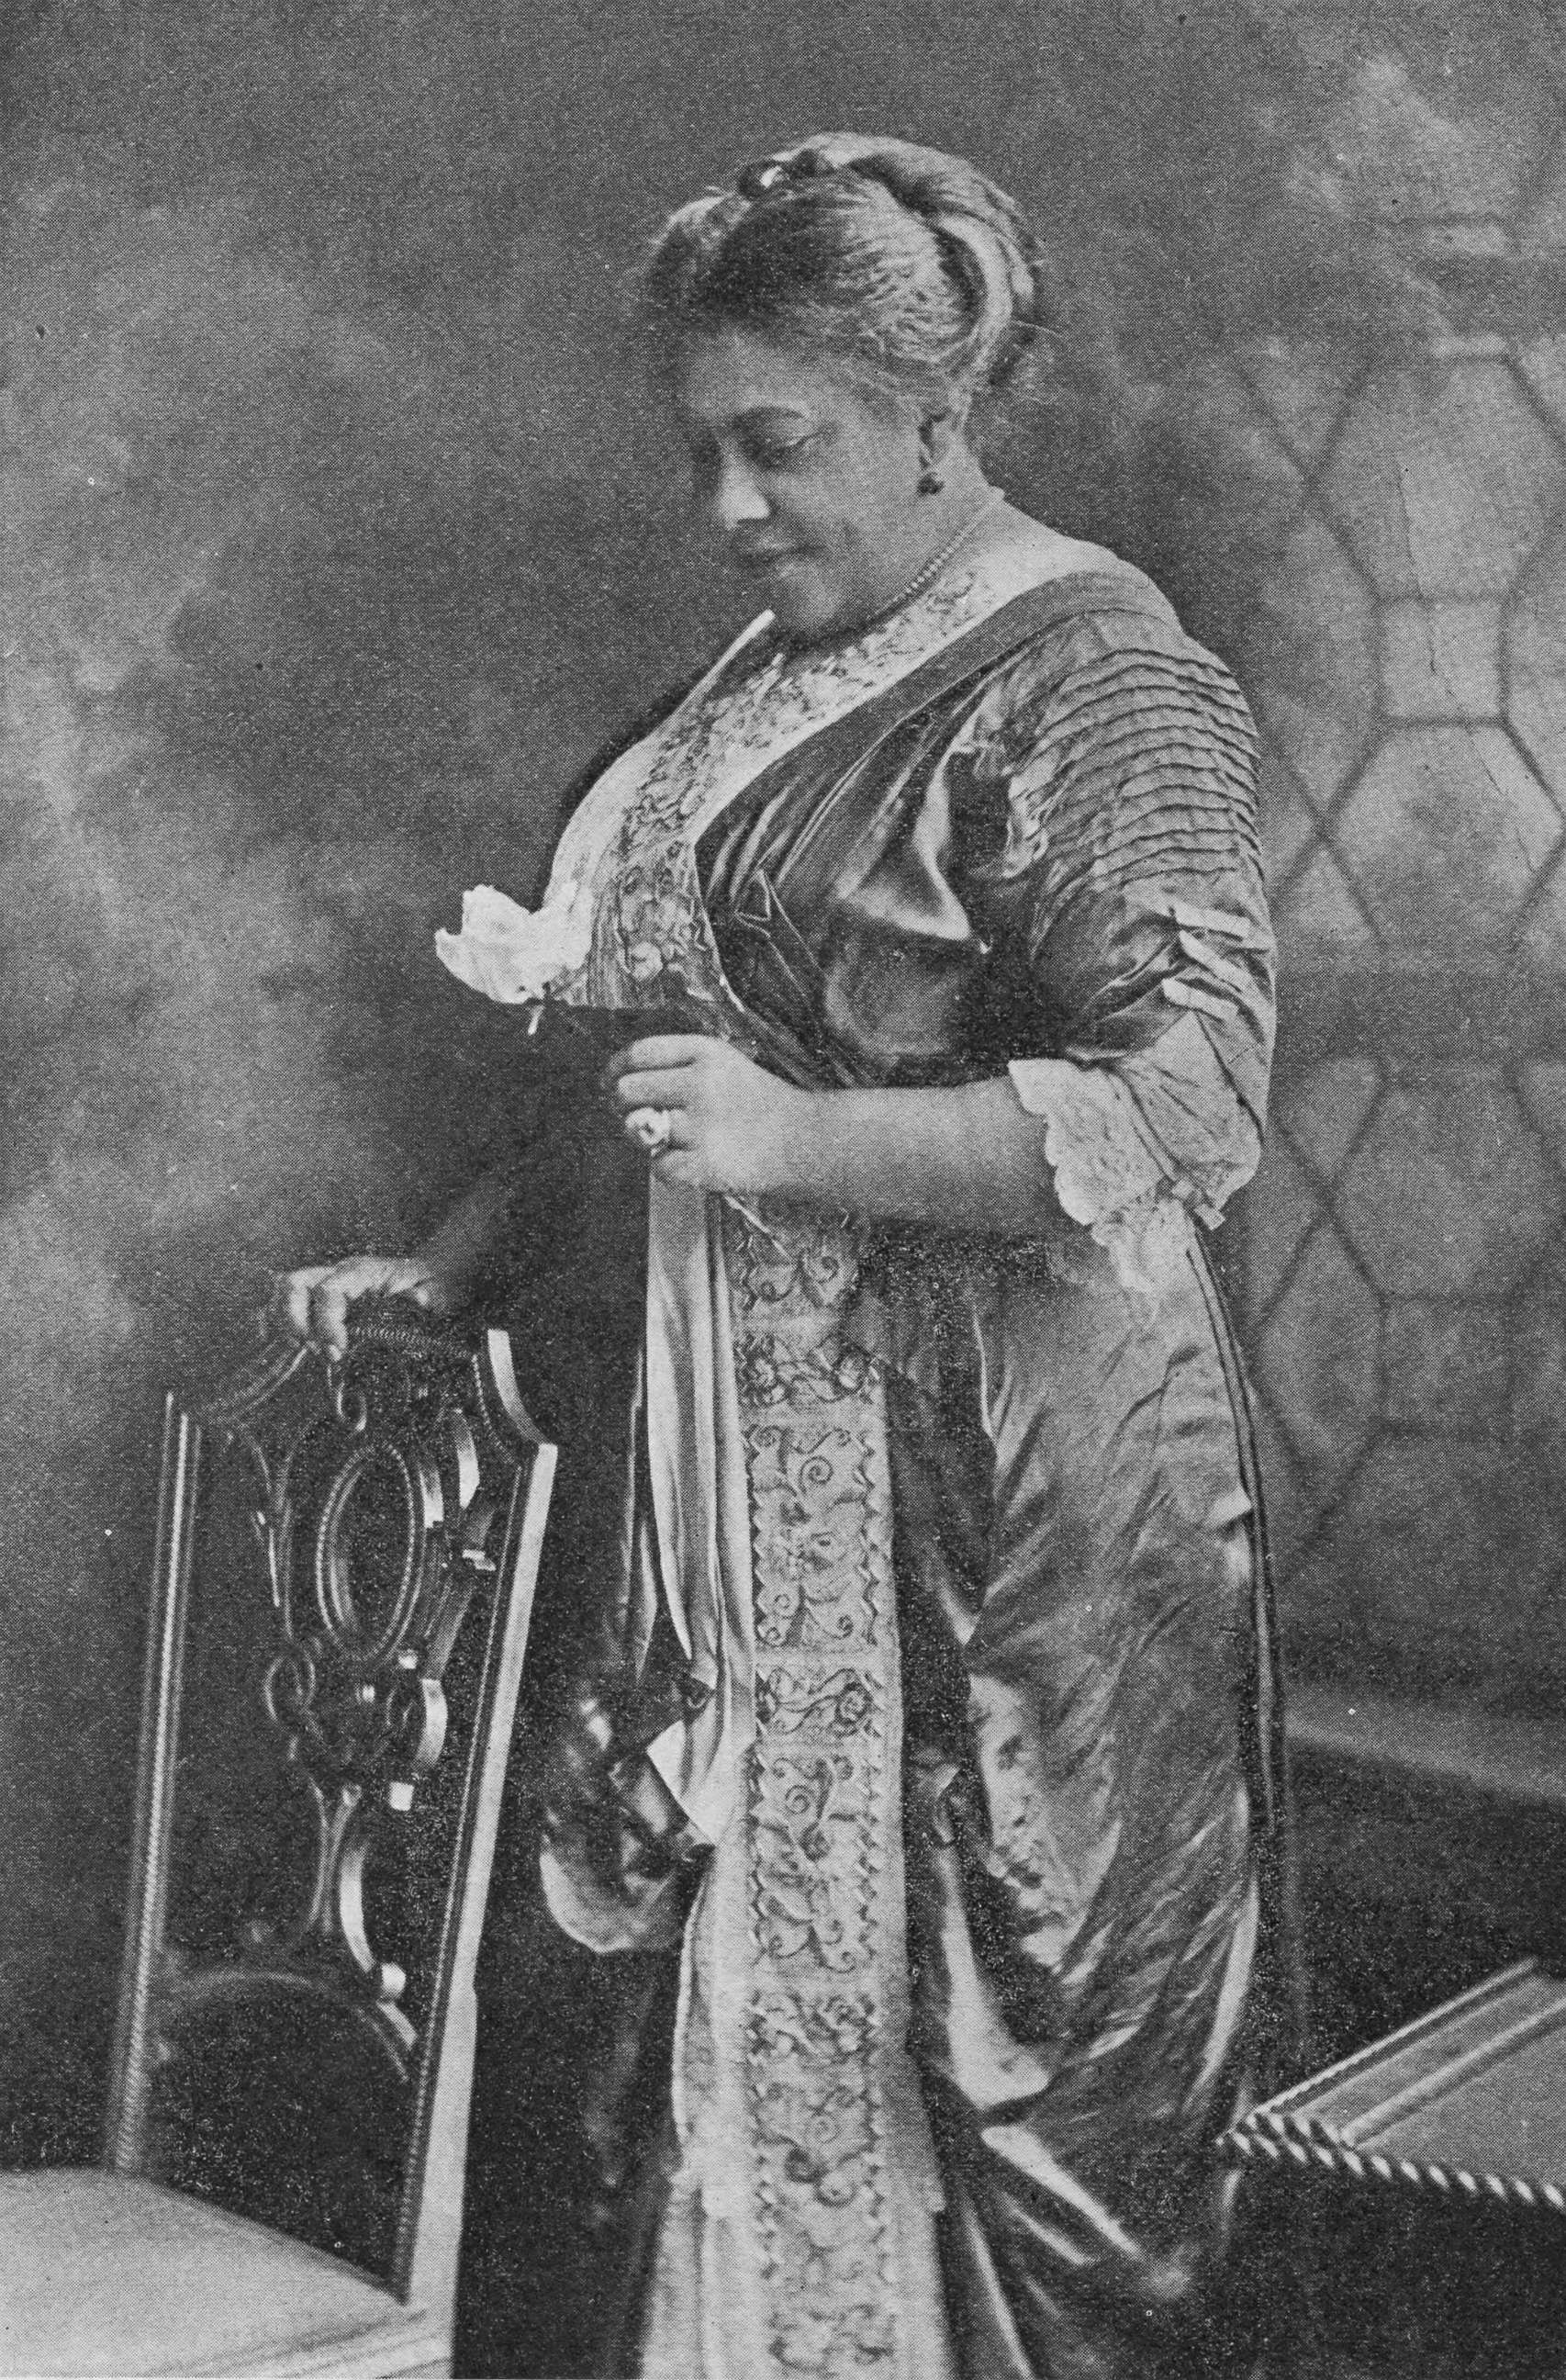 PHOTO: President of the National Association of Colored Women Mary Burnett Talbert poses for a photograph published in the Oct. 1916 issue of "The Champion" magazine.